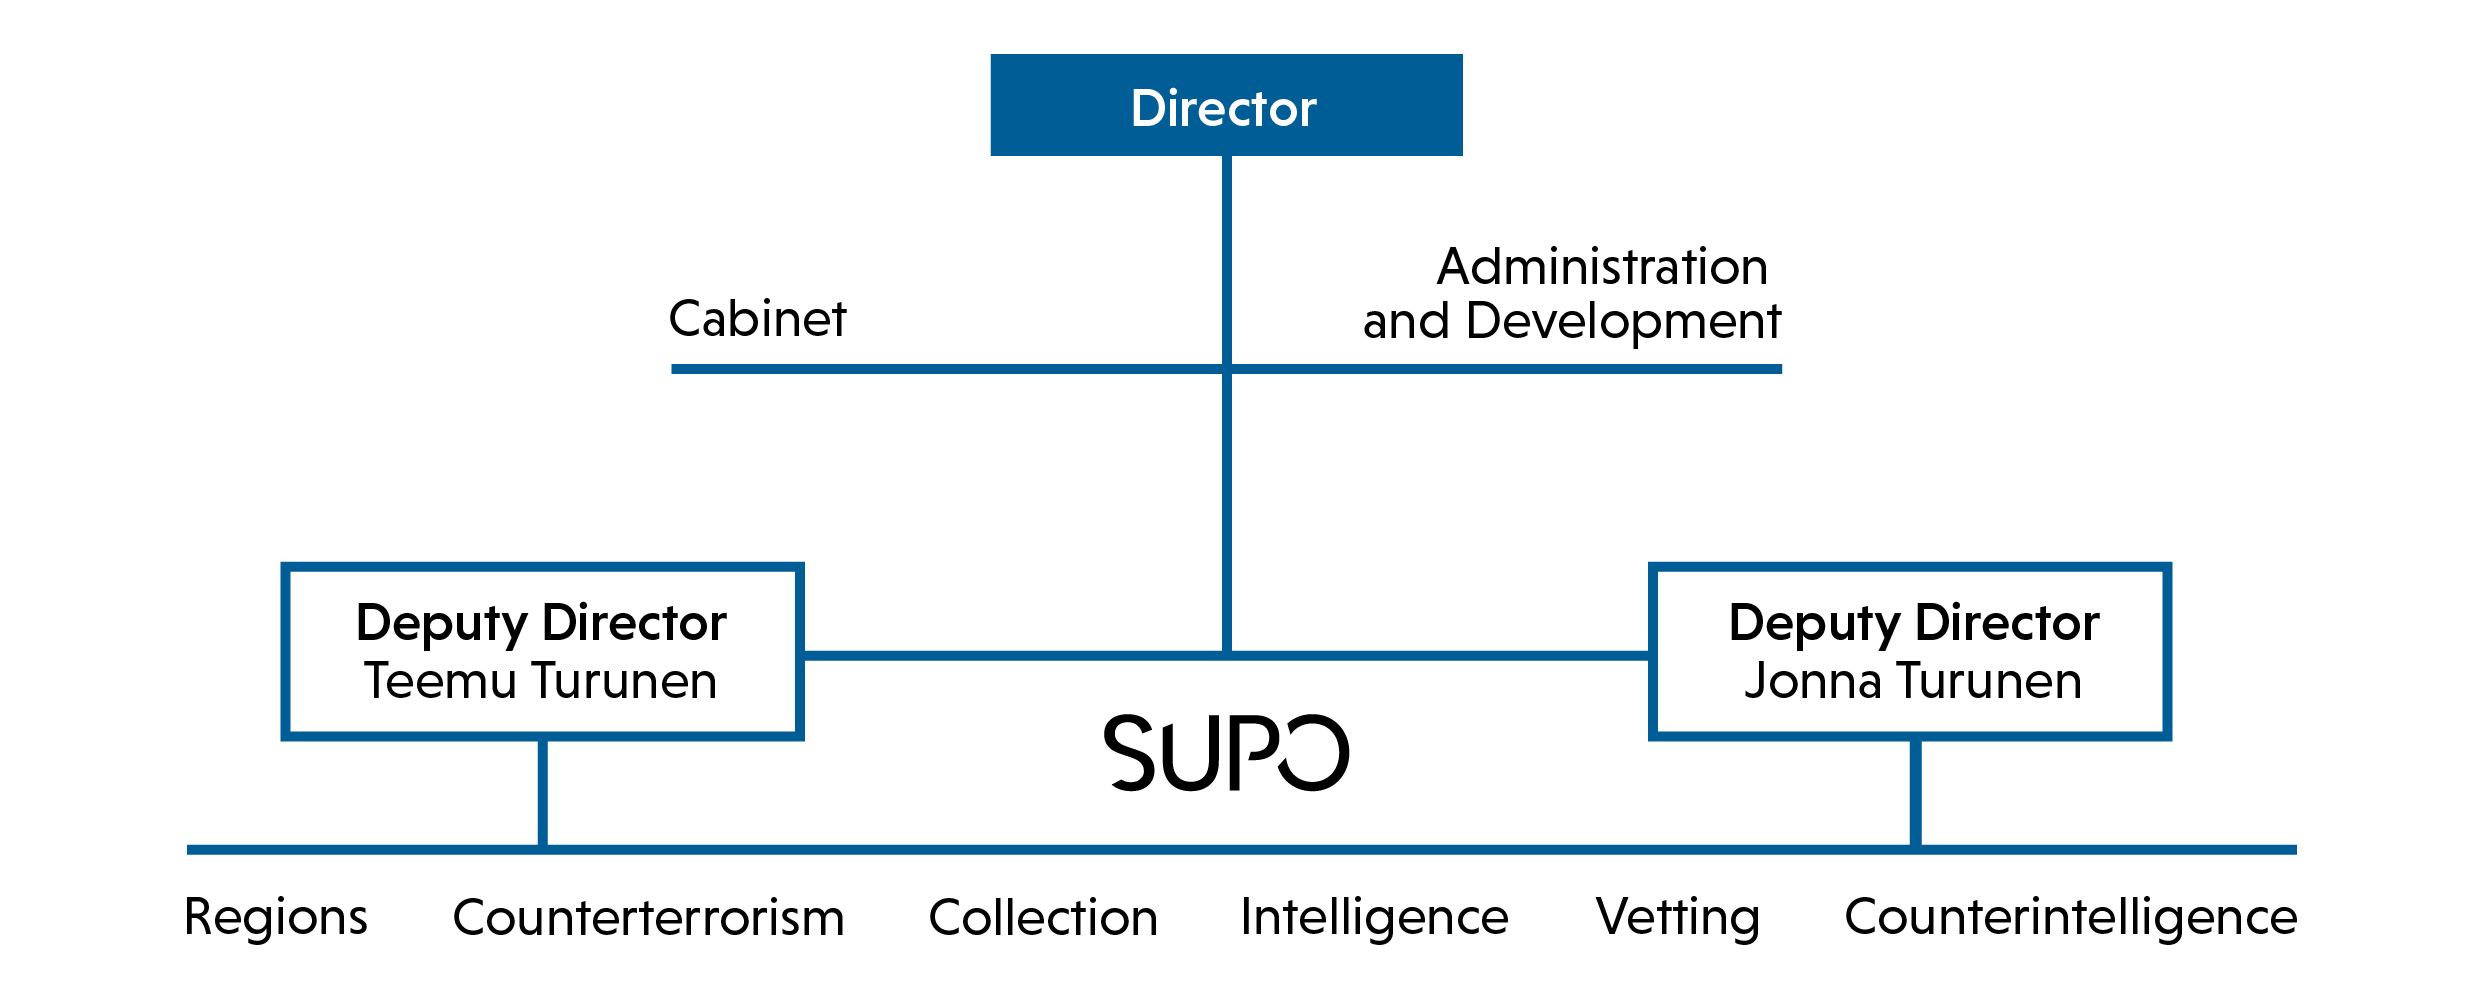 Supo organisation chart. Director of Supo and two Deputy Directors. Eight departments.